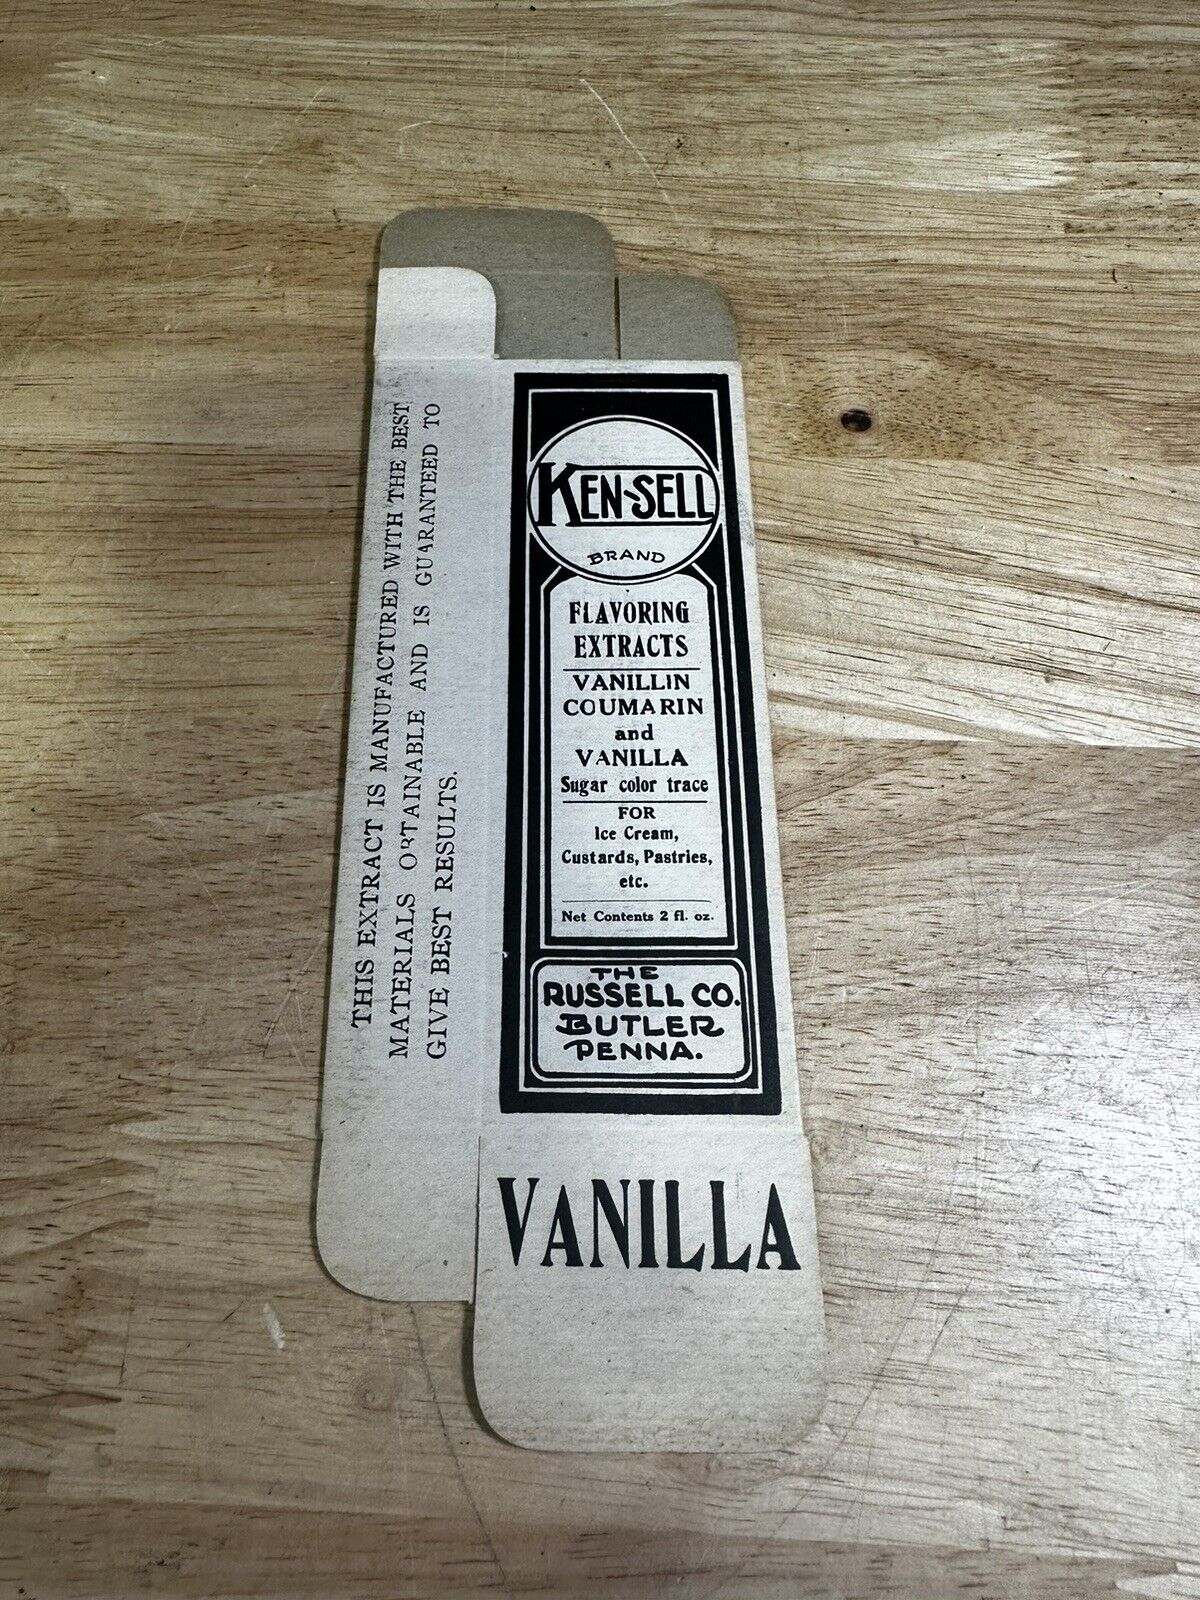 Vintage The Russell Co. Butler PA “Ken-Sell” Vanilla Extract Cardboard Box